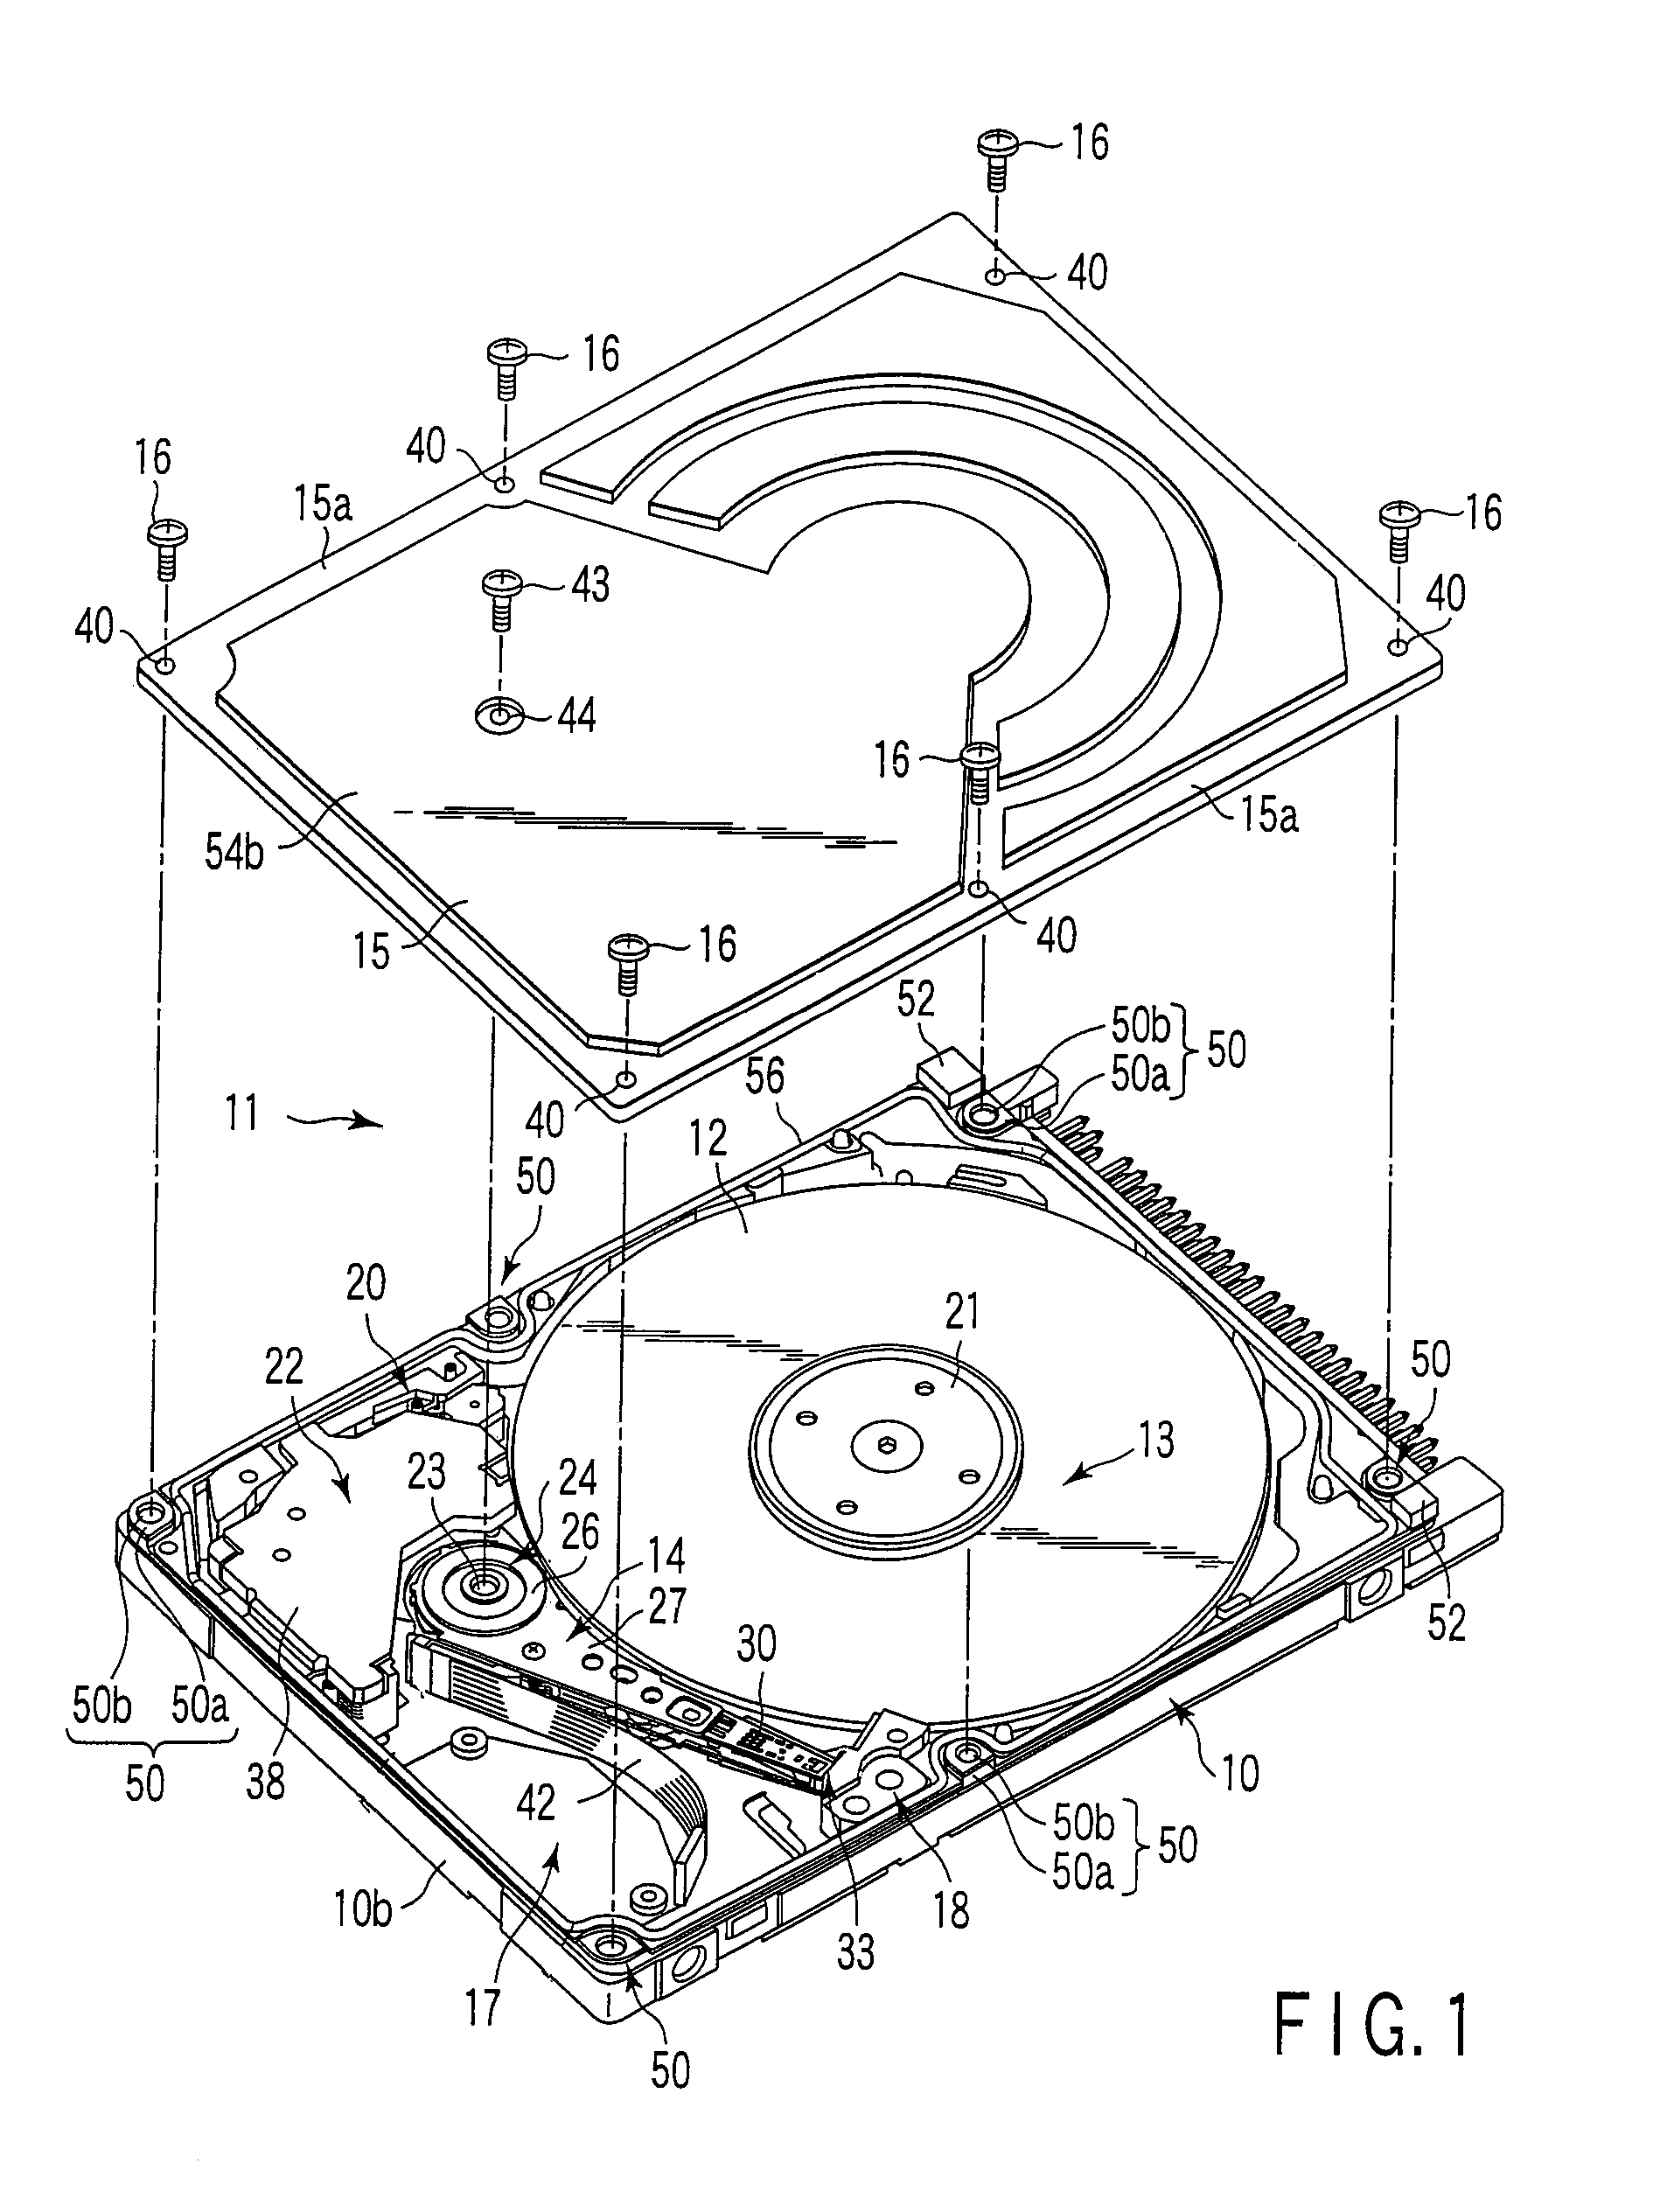 Disk drive with non-magnetic cover and base plated with conductively connected magnetic shielding layers